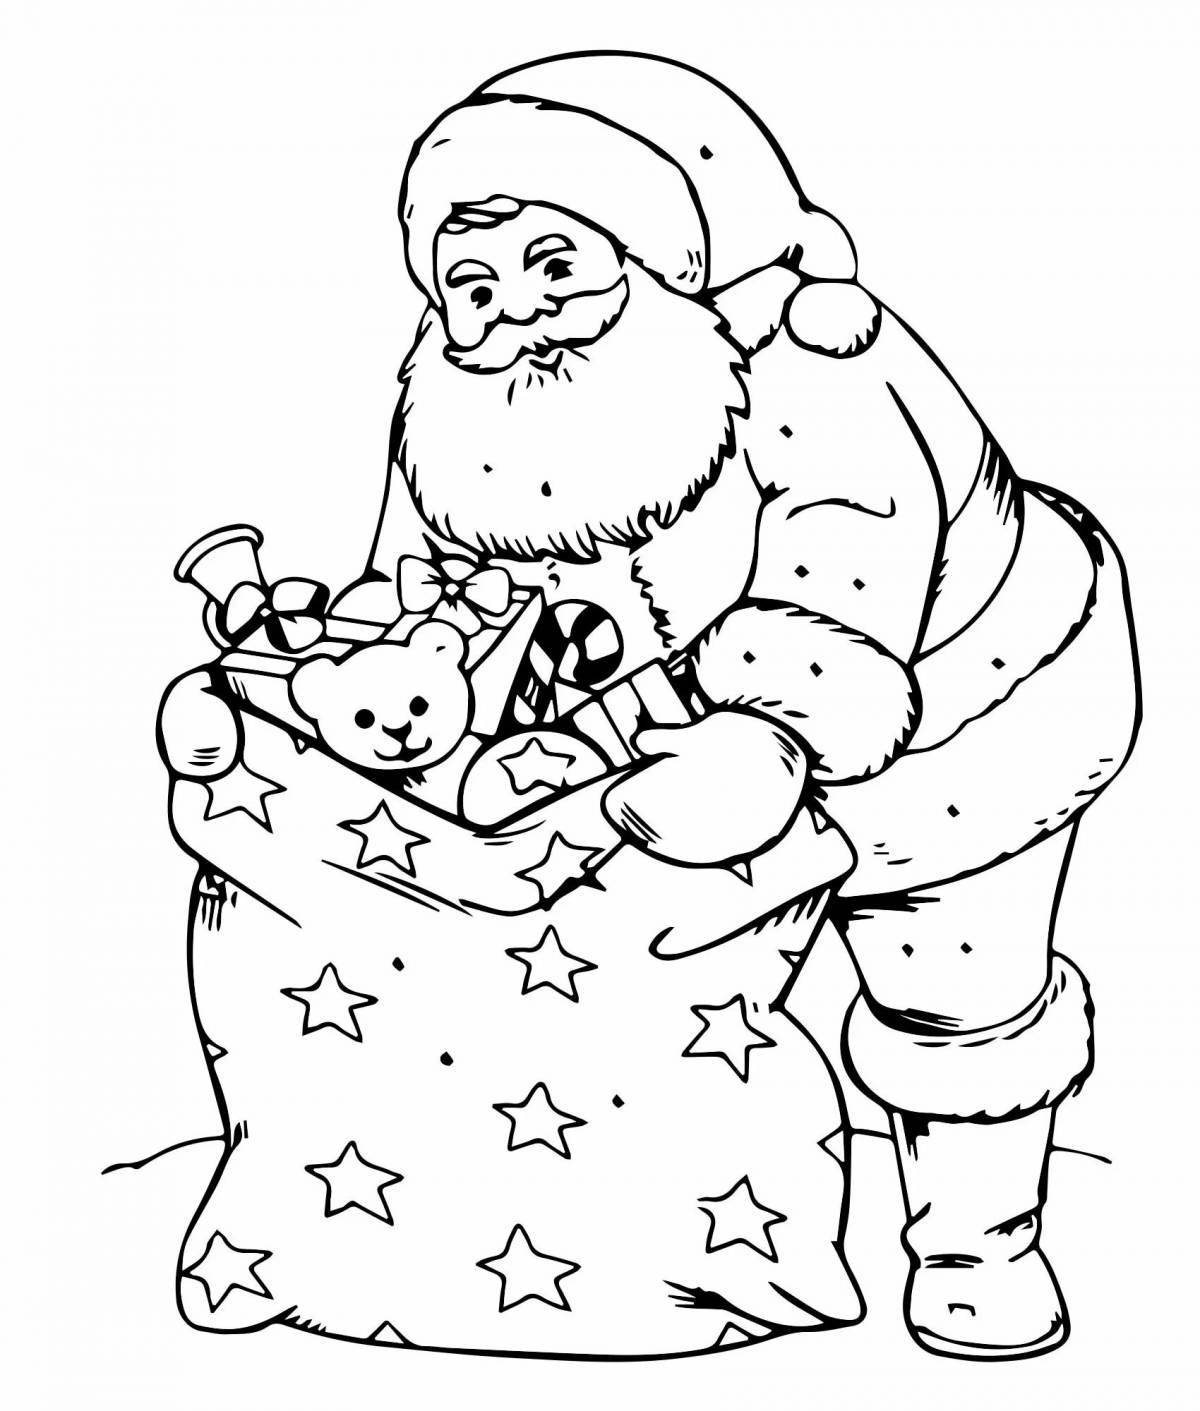 Great cool Christmas coloring book